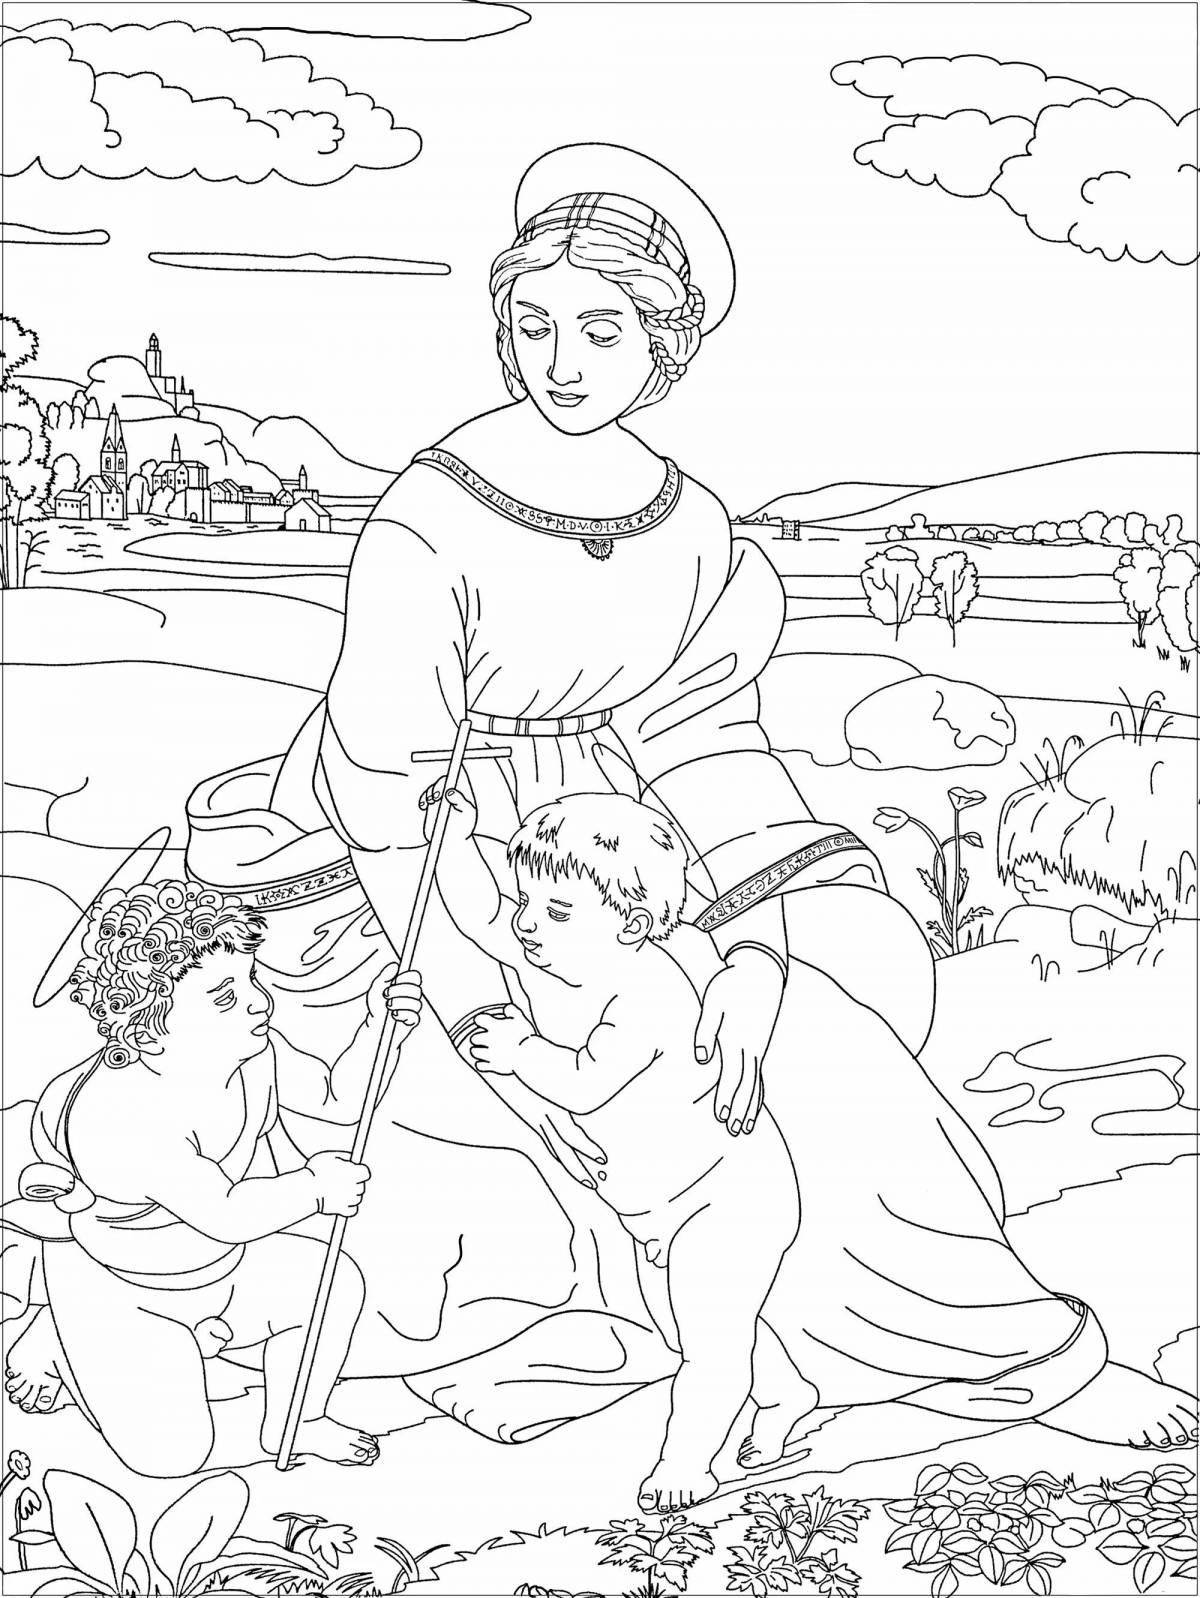 Great historical coloring book